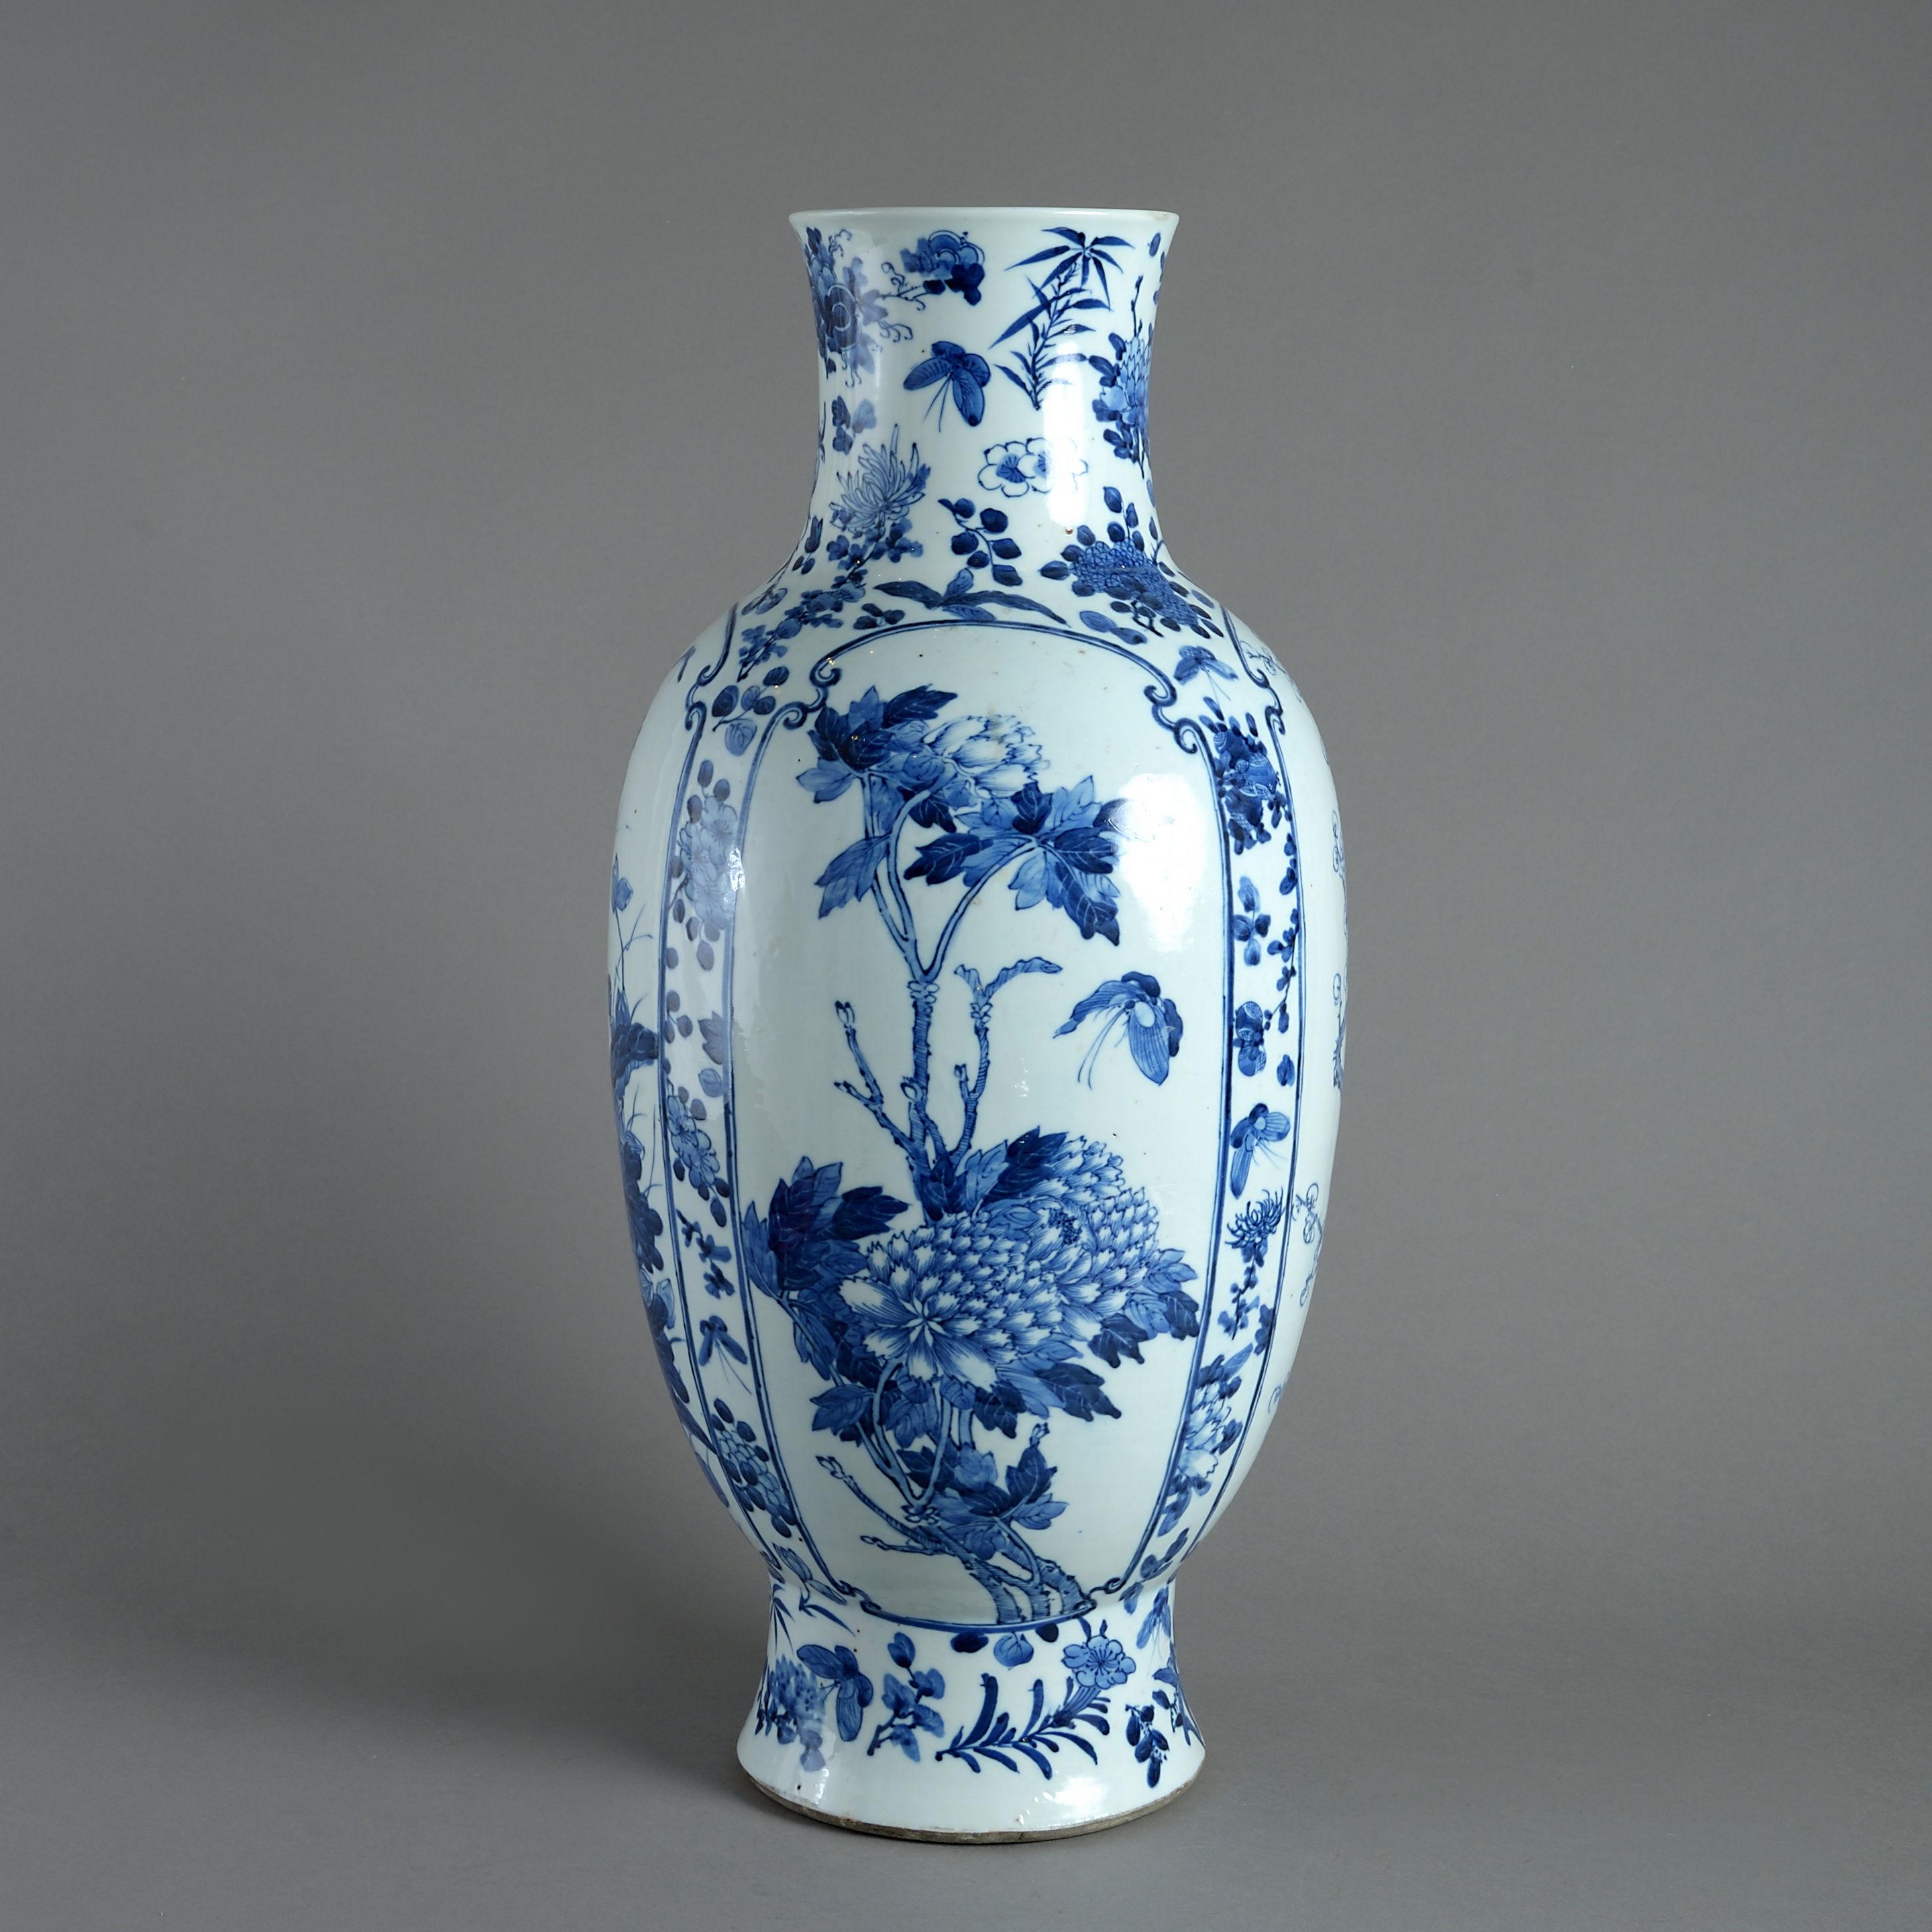 A fine late 18th century blue and white glazed vase of good scale and generous form, decorated throughout with floral and foliate panels depicting the four seasons of the year. 

Qing dynasty, Qianlong period (1736-1795).

Condition, good with